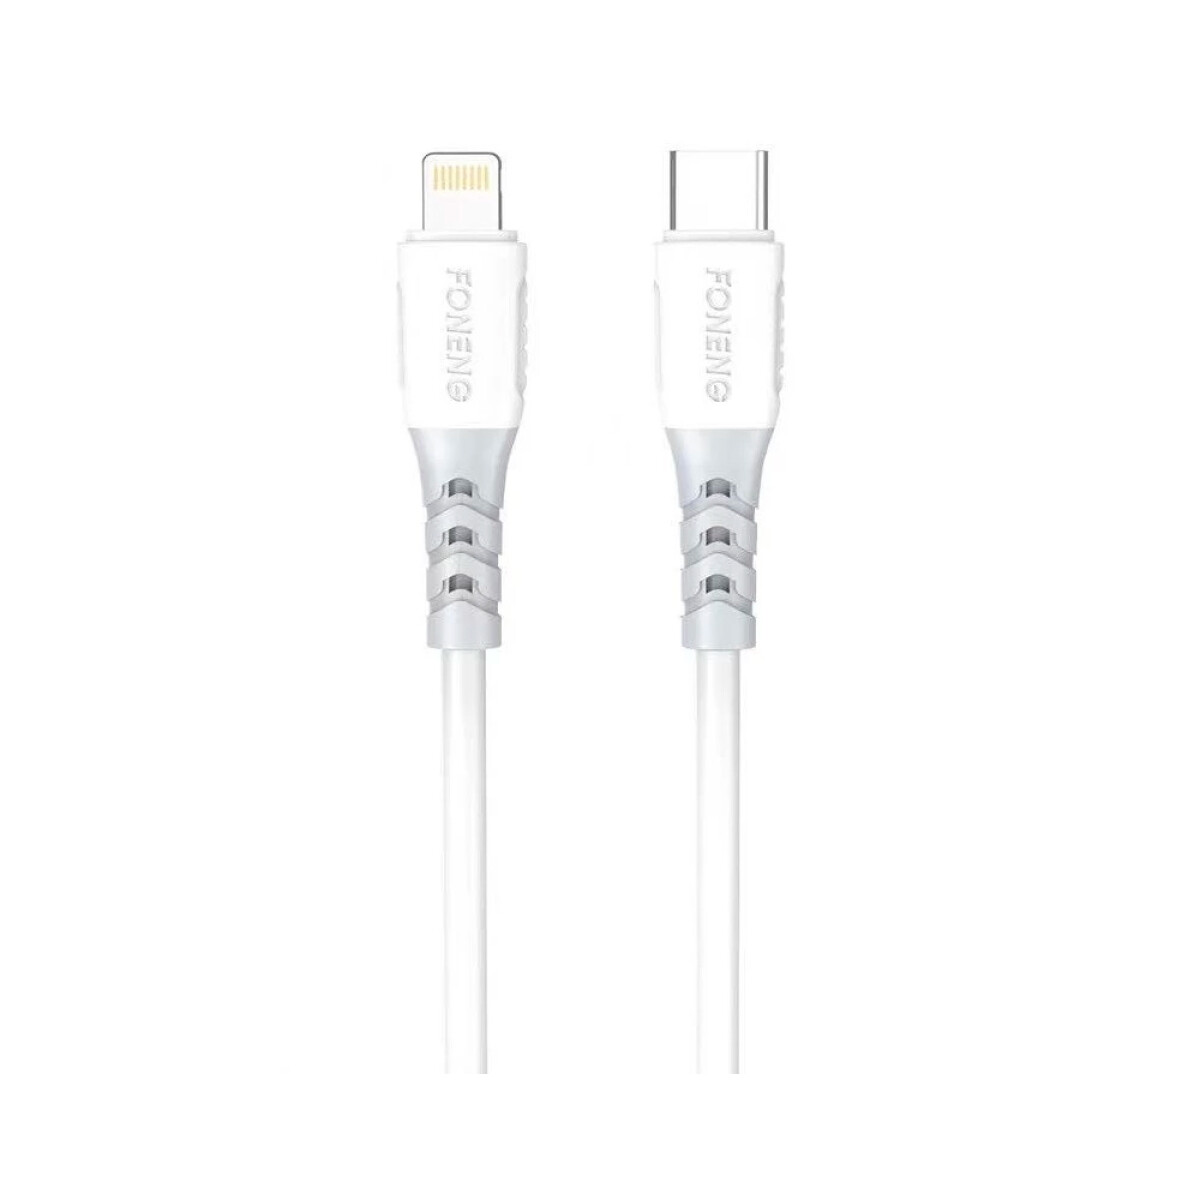 Cable Compatible iPhone Apple Lightning 3A 2 Metros X66 Foneng Cable Compatible iPhone Apple Lightning 3A 2 Metros X66 Foneng